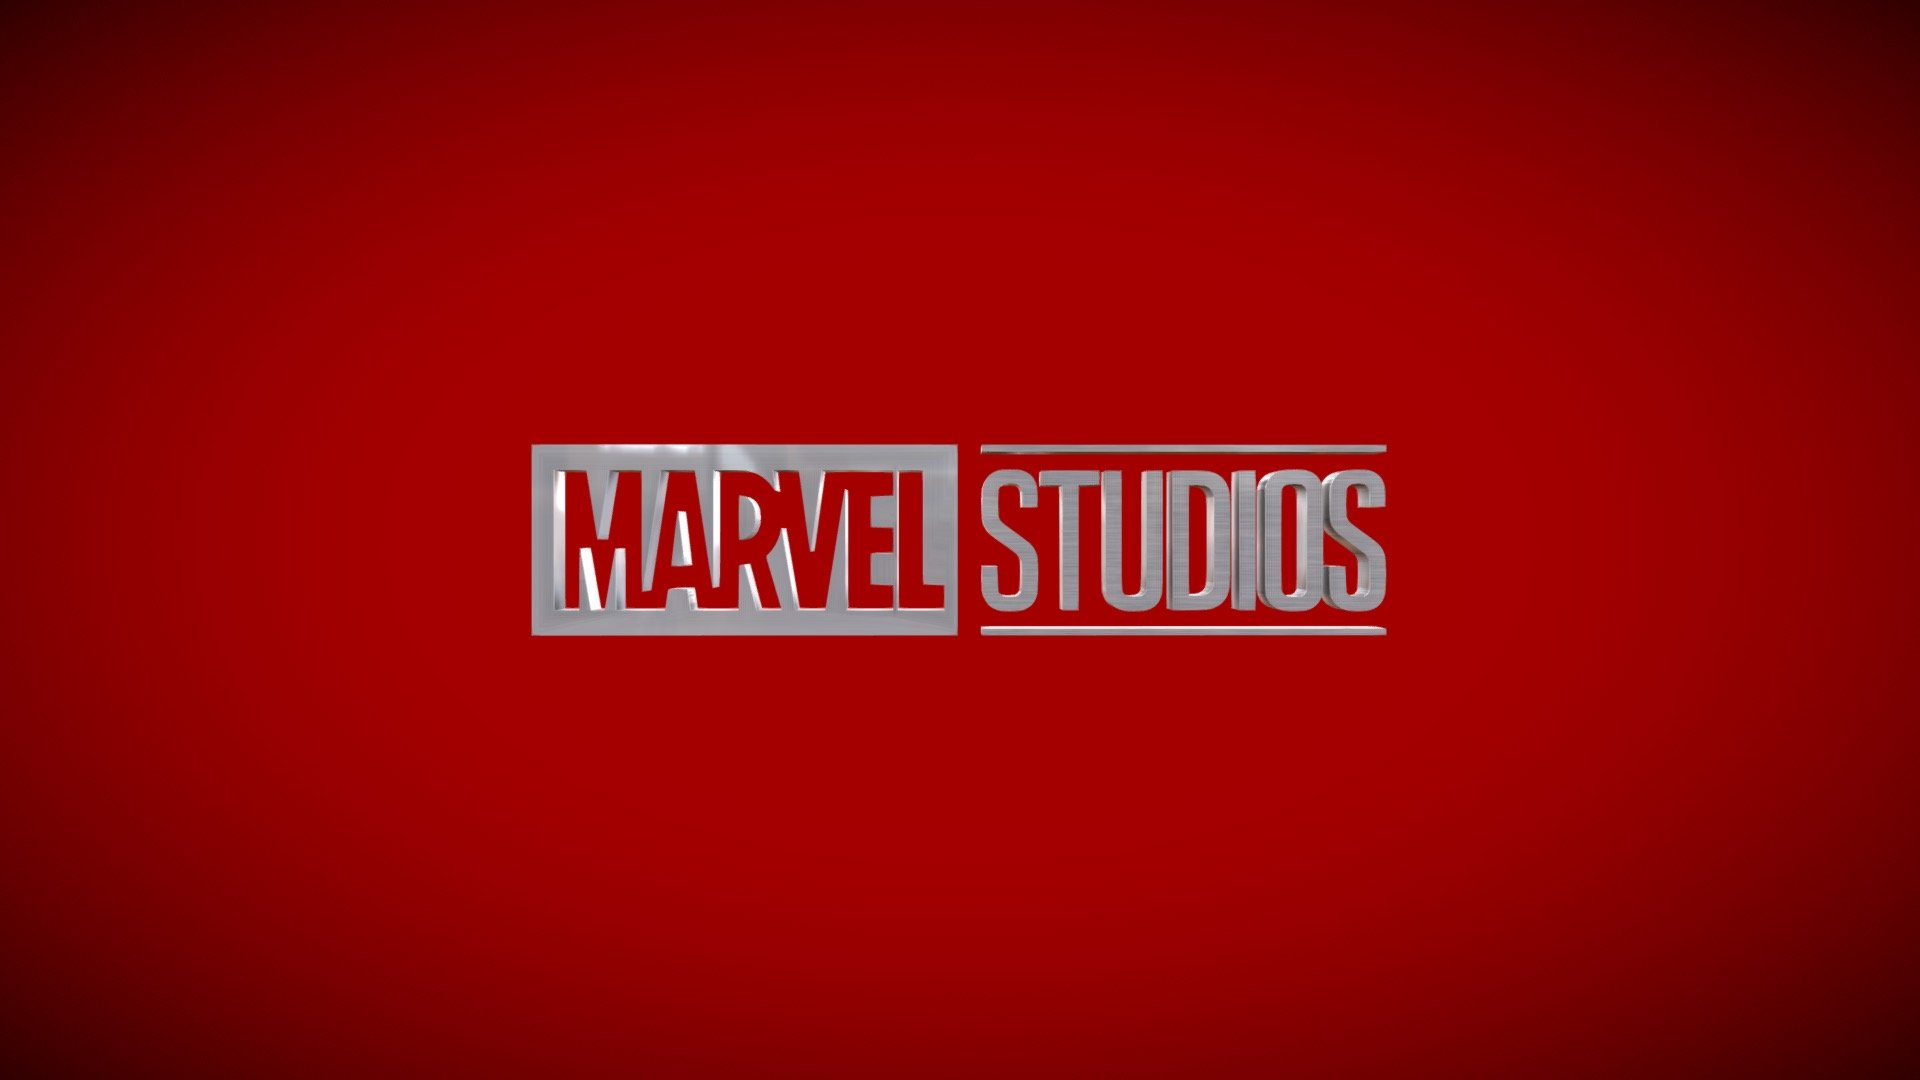 Logo - Collection Film Compagny
Limited Edition Digital Art ( Series )

Digital Art Creation by Artist LBro.

Please contact me for any pricing Information Collaborative Project or Partnership regarding art works available. Any comments can be posted here as well ! Contact the artist/Comments. LBro.




Website

Facebook 

Twitter

Youtube

Case of Study Logo Marvel

Marvel Studios is an American film and television studio that is a subsidiary of Walt Disney Studios,  is known for the production of the Marvel Cinematic Universe films, based on characters that appear in Marvel Comics publications.

Ref. Logo history - Logo Film Company - Marvel - 3D model by xrealis 3d model